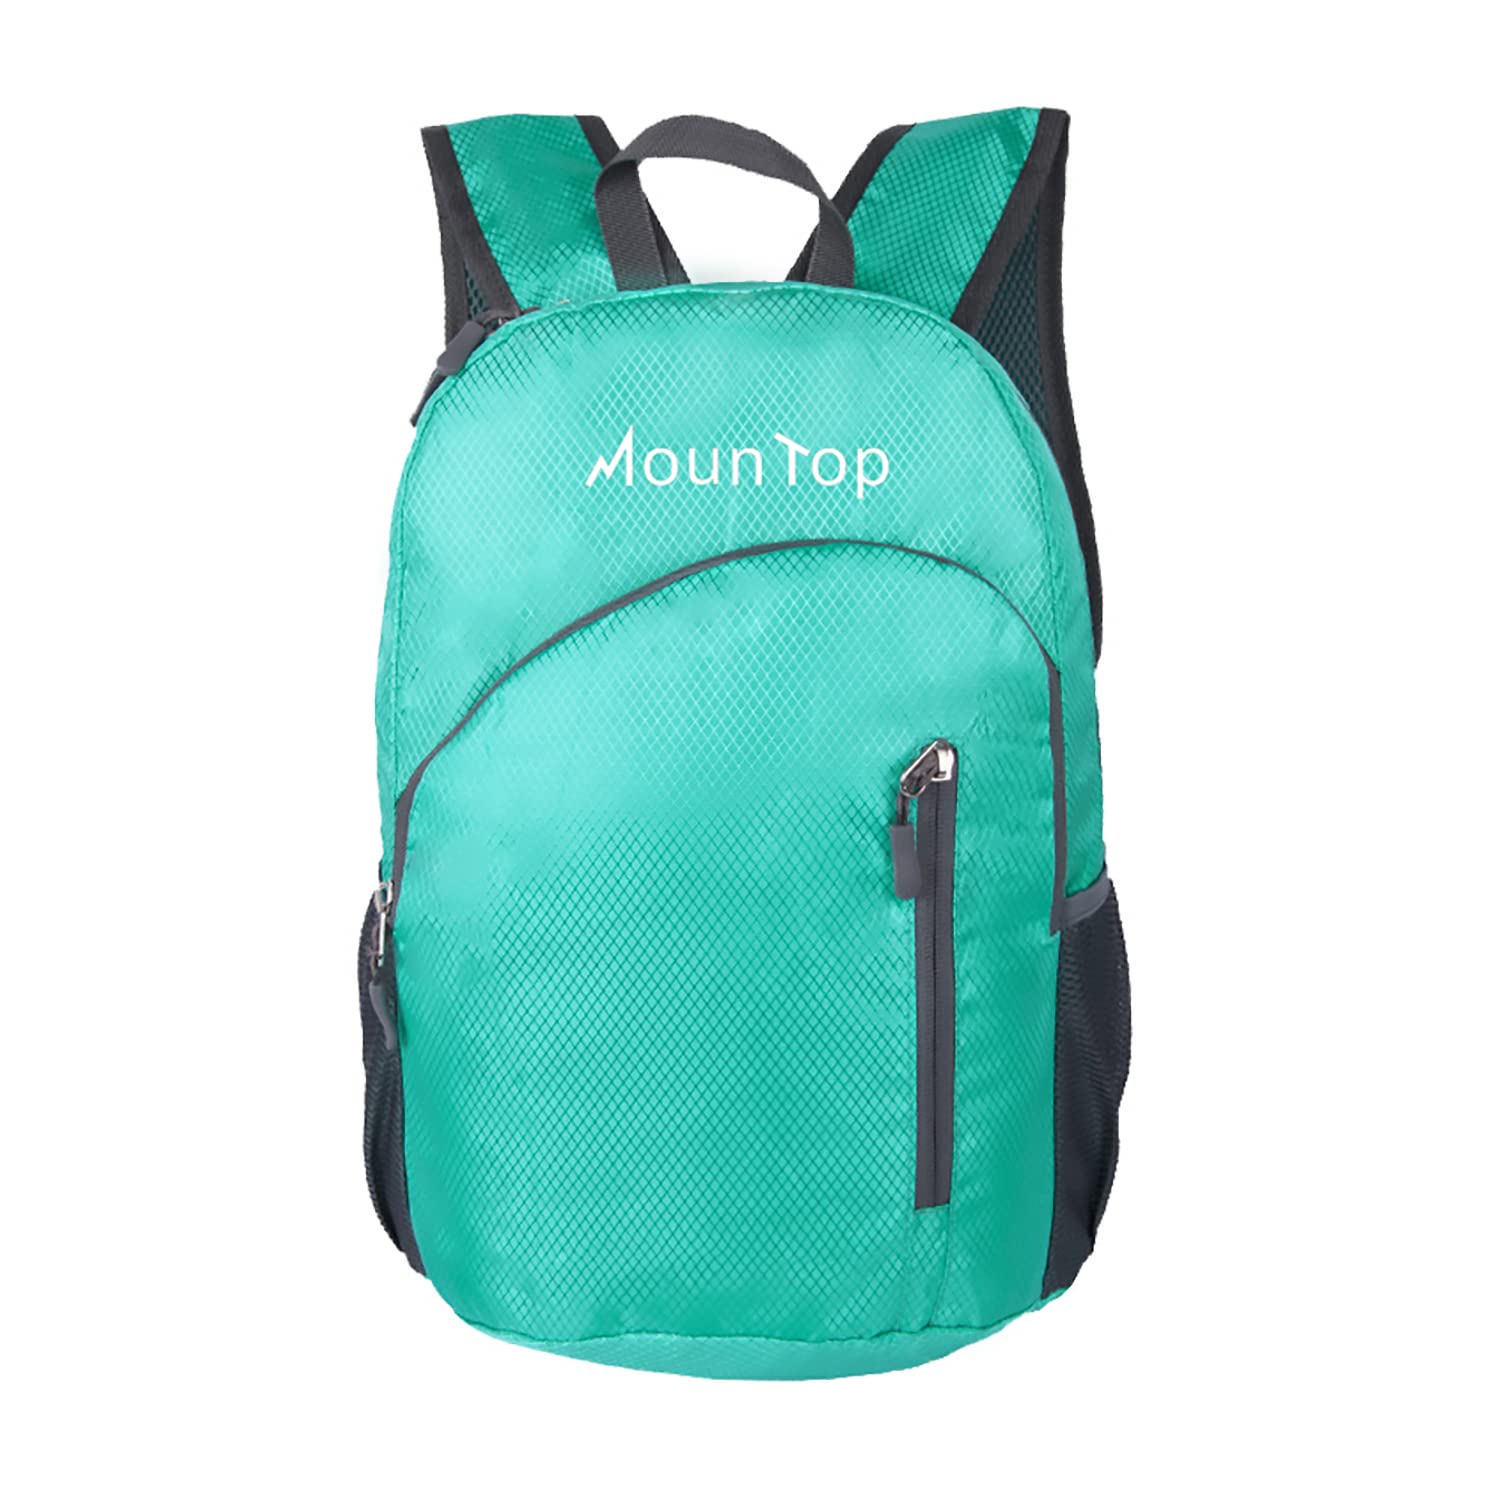 Mountop Outdoor Lightweight Foldable Water Resistant Backpack for Travel Hiking Riding